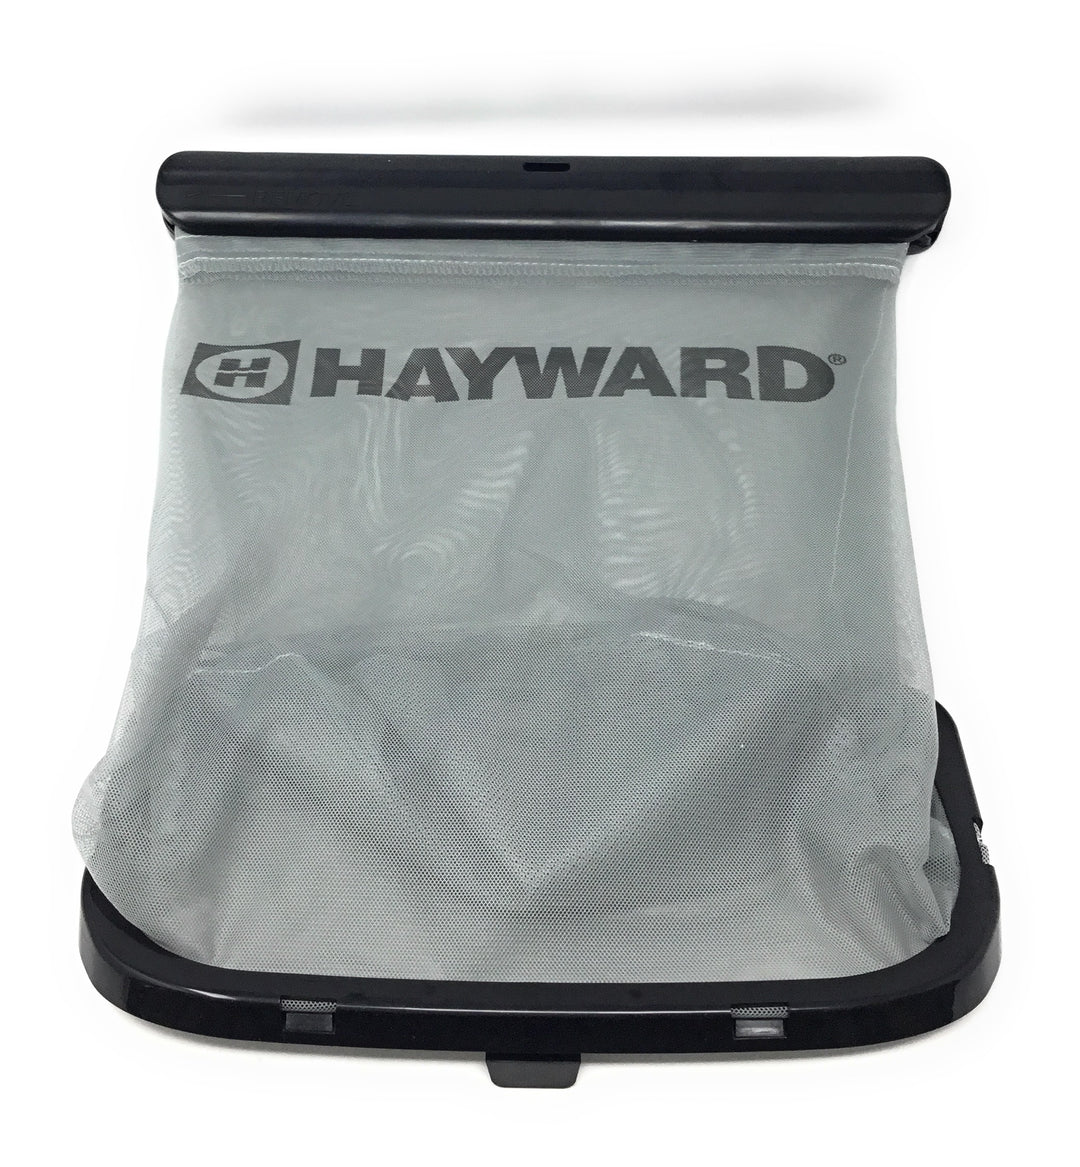 Front View - Hayward TriVac 500 Bag Kit - Float Included - ePoolSupply